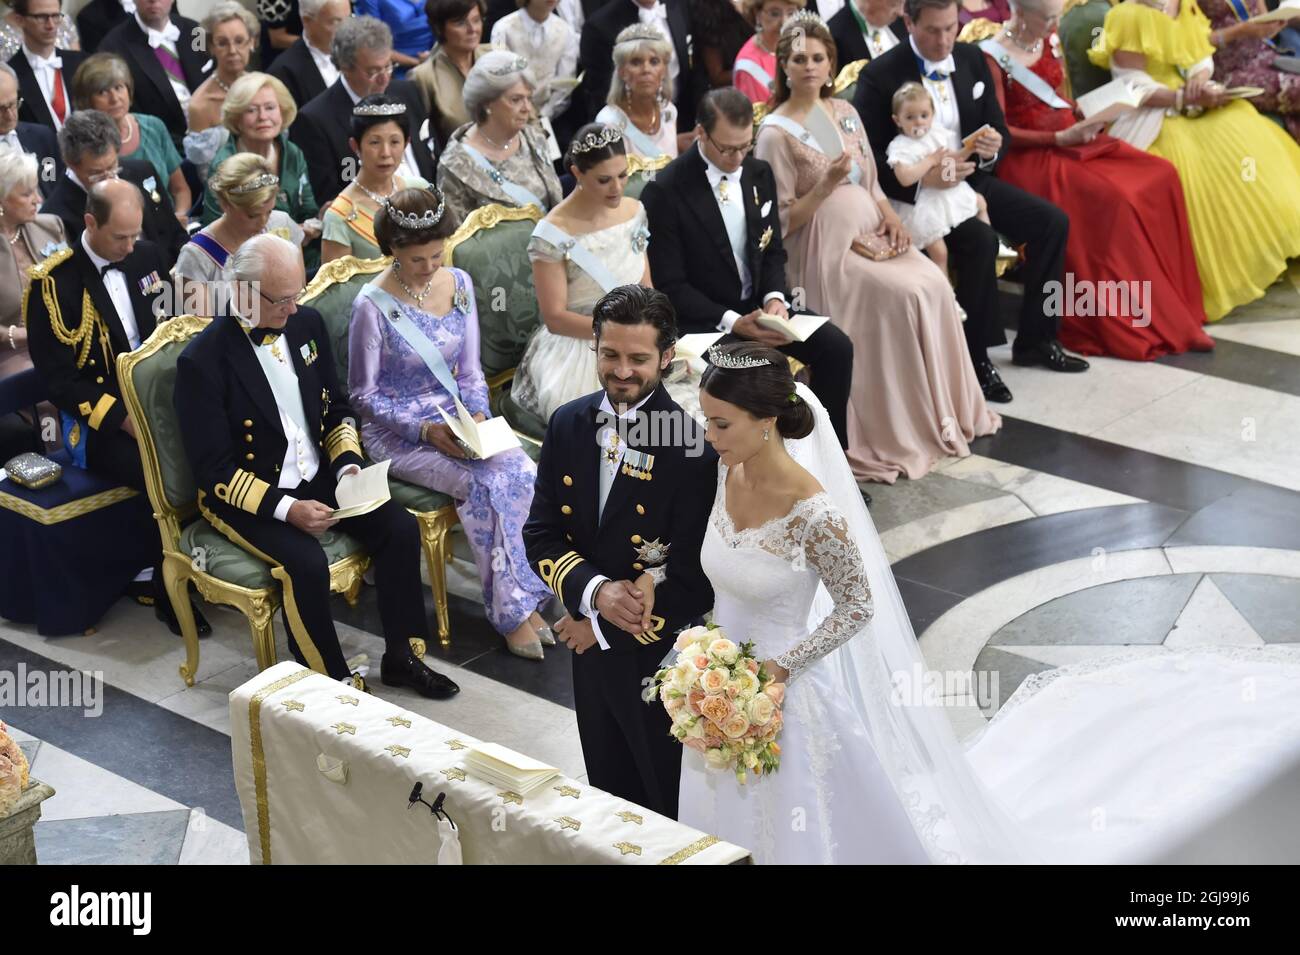 Prince Carl Philip and Sofia Hellqvist during their wedding in the Royal Chapel in Stockholm, Sweden, June 13, 2015. In the background King Carl Gustaf, Queen Silvia, Crown Princess Victoria, Prince Daniel Princess Madeleine. Stock Photo